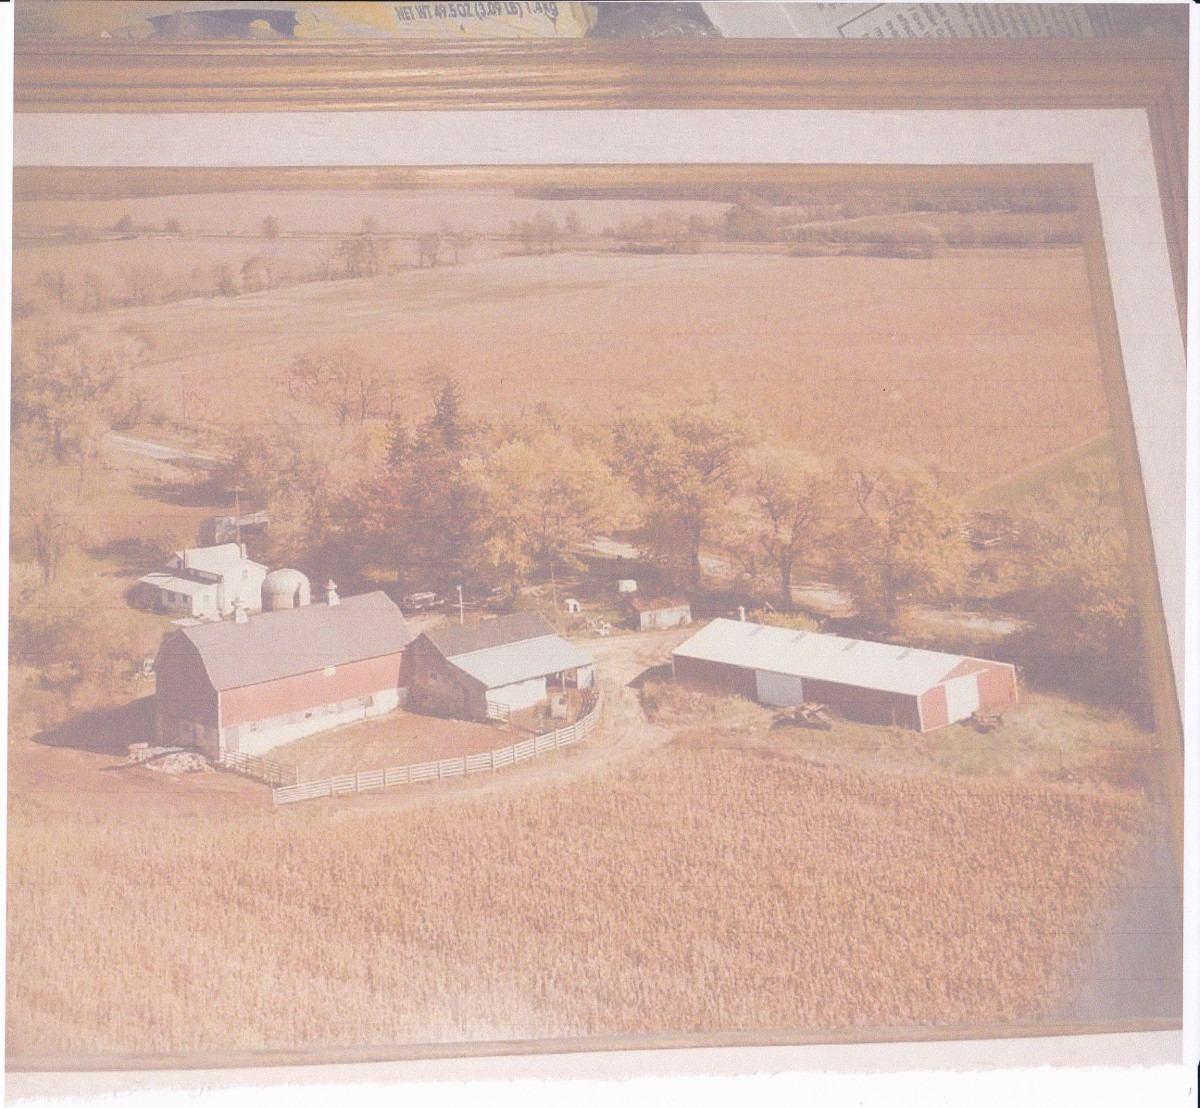 Part of the land and buildings of the farm which mom and dad purchased in 1957.  Picture taken around 1970.